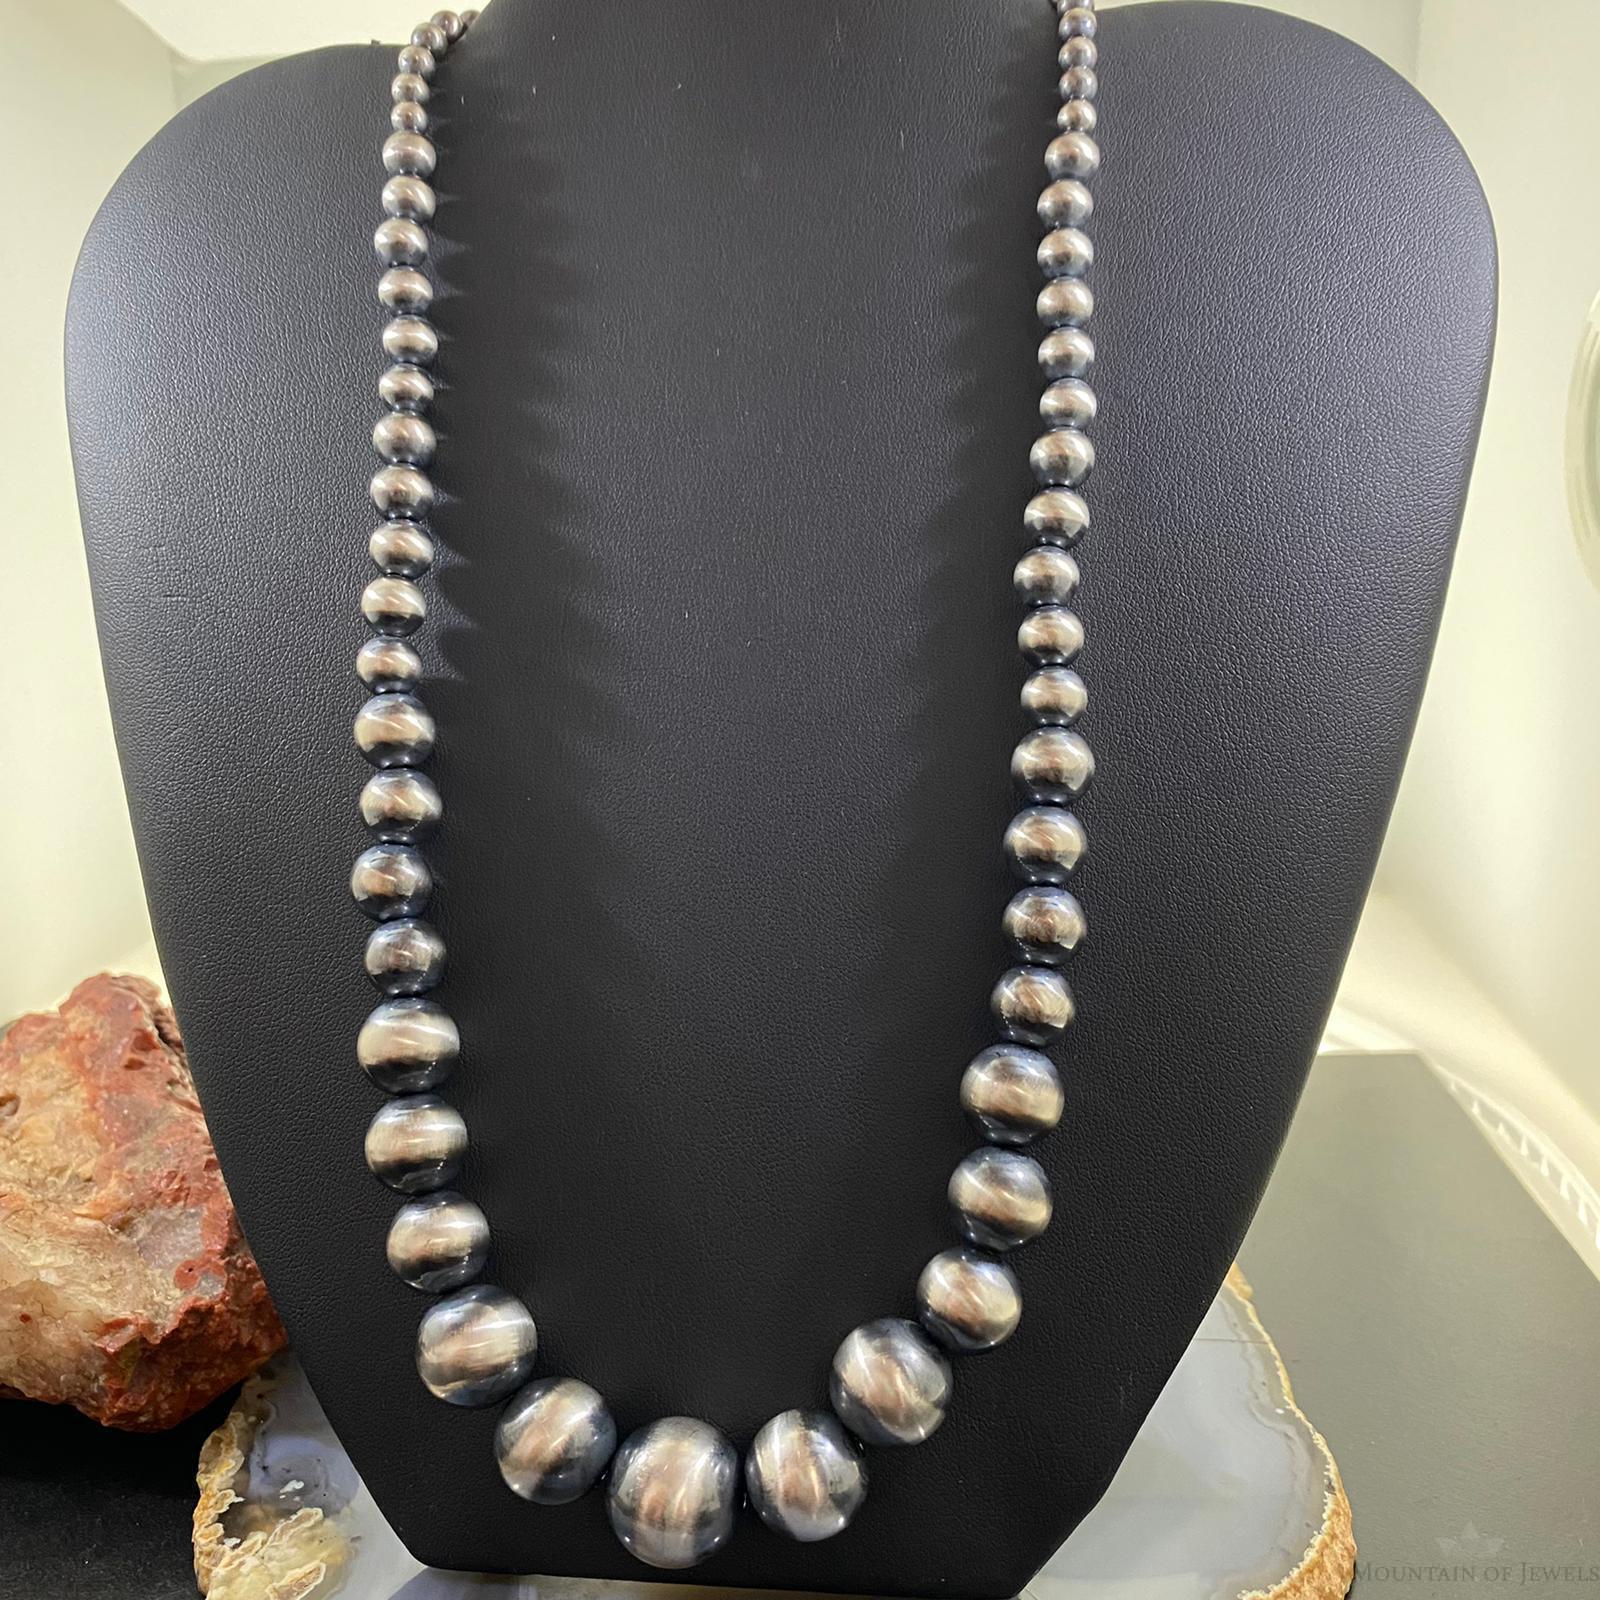 Navajo Pearl Beads Graduated 4-16 mm Sterling Silver 18" Necklace For Women - Mountain Of Jewels